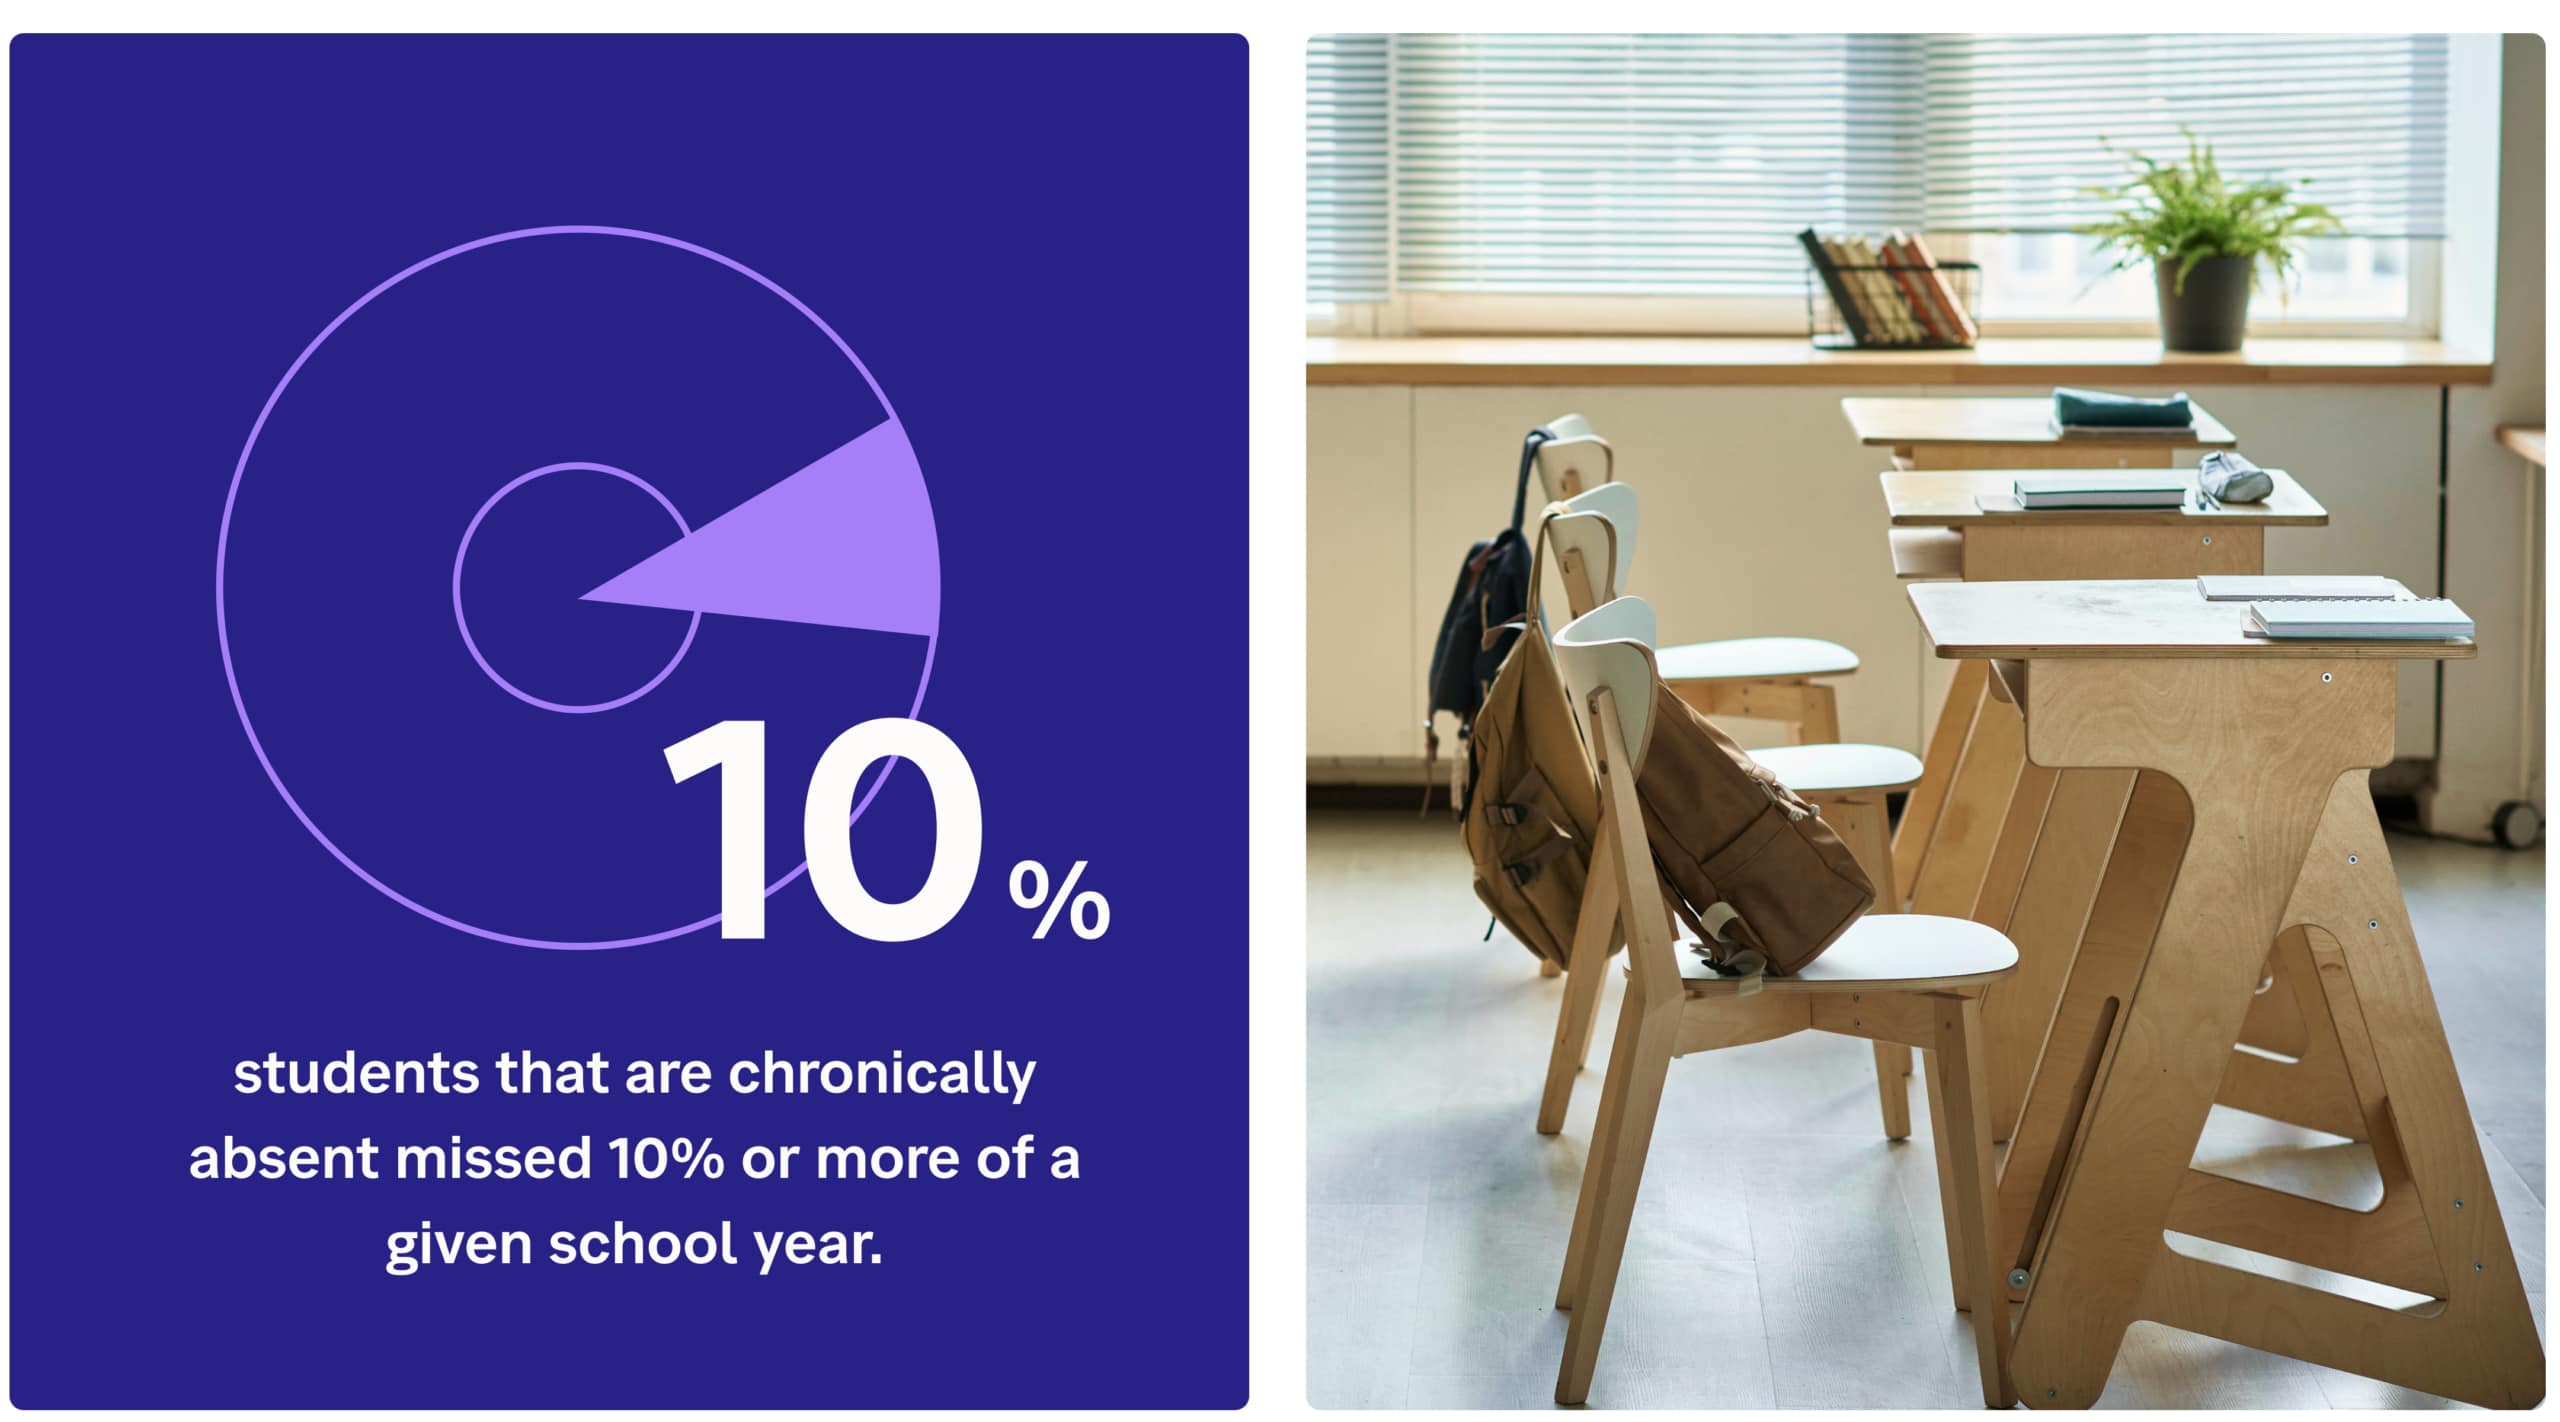 10% of students - chronically absent